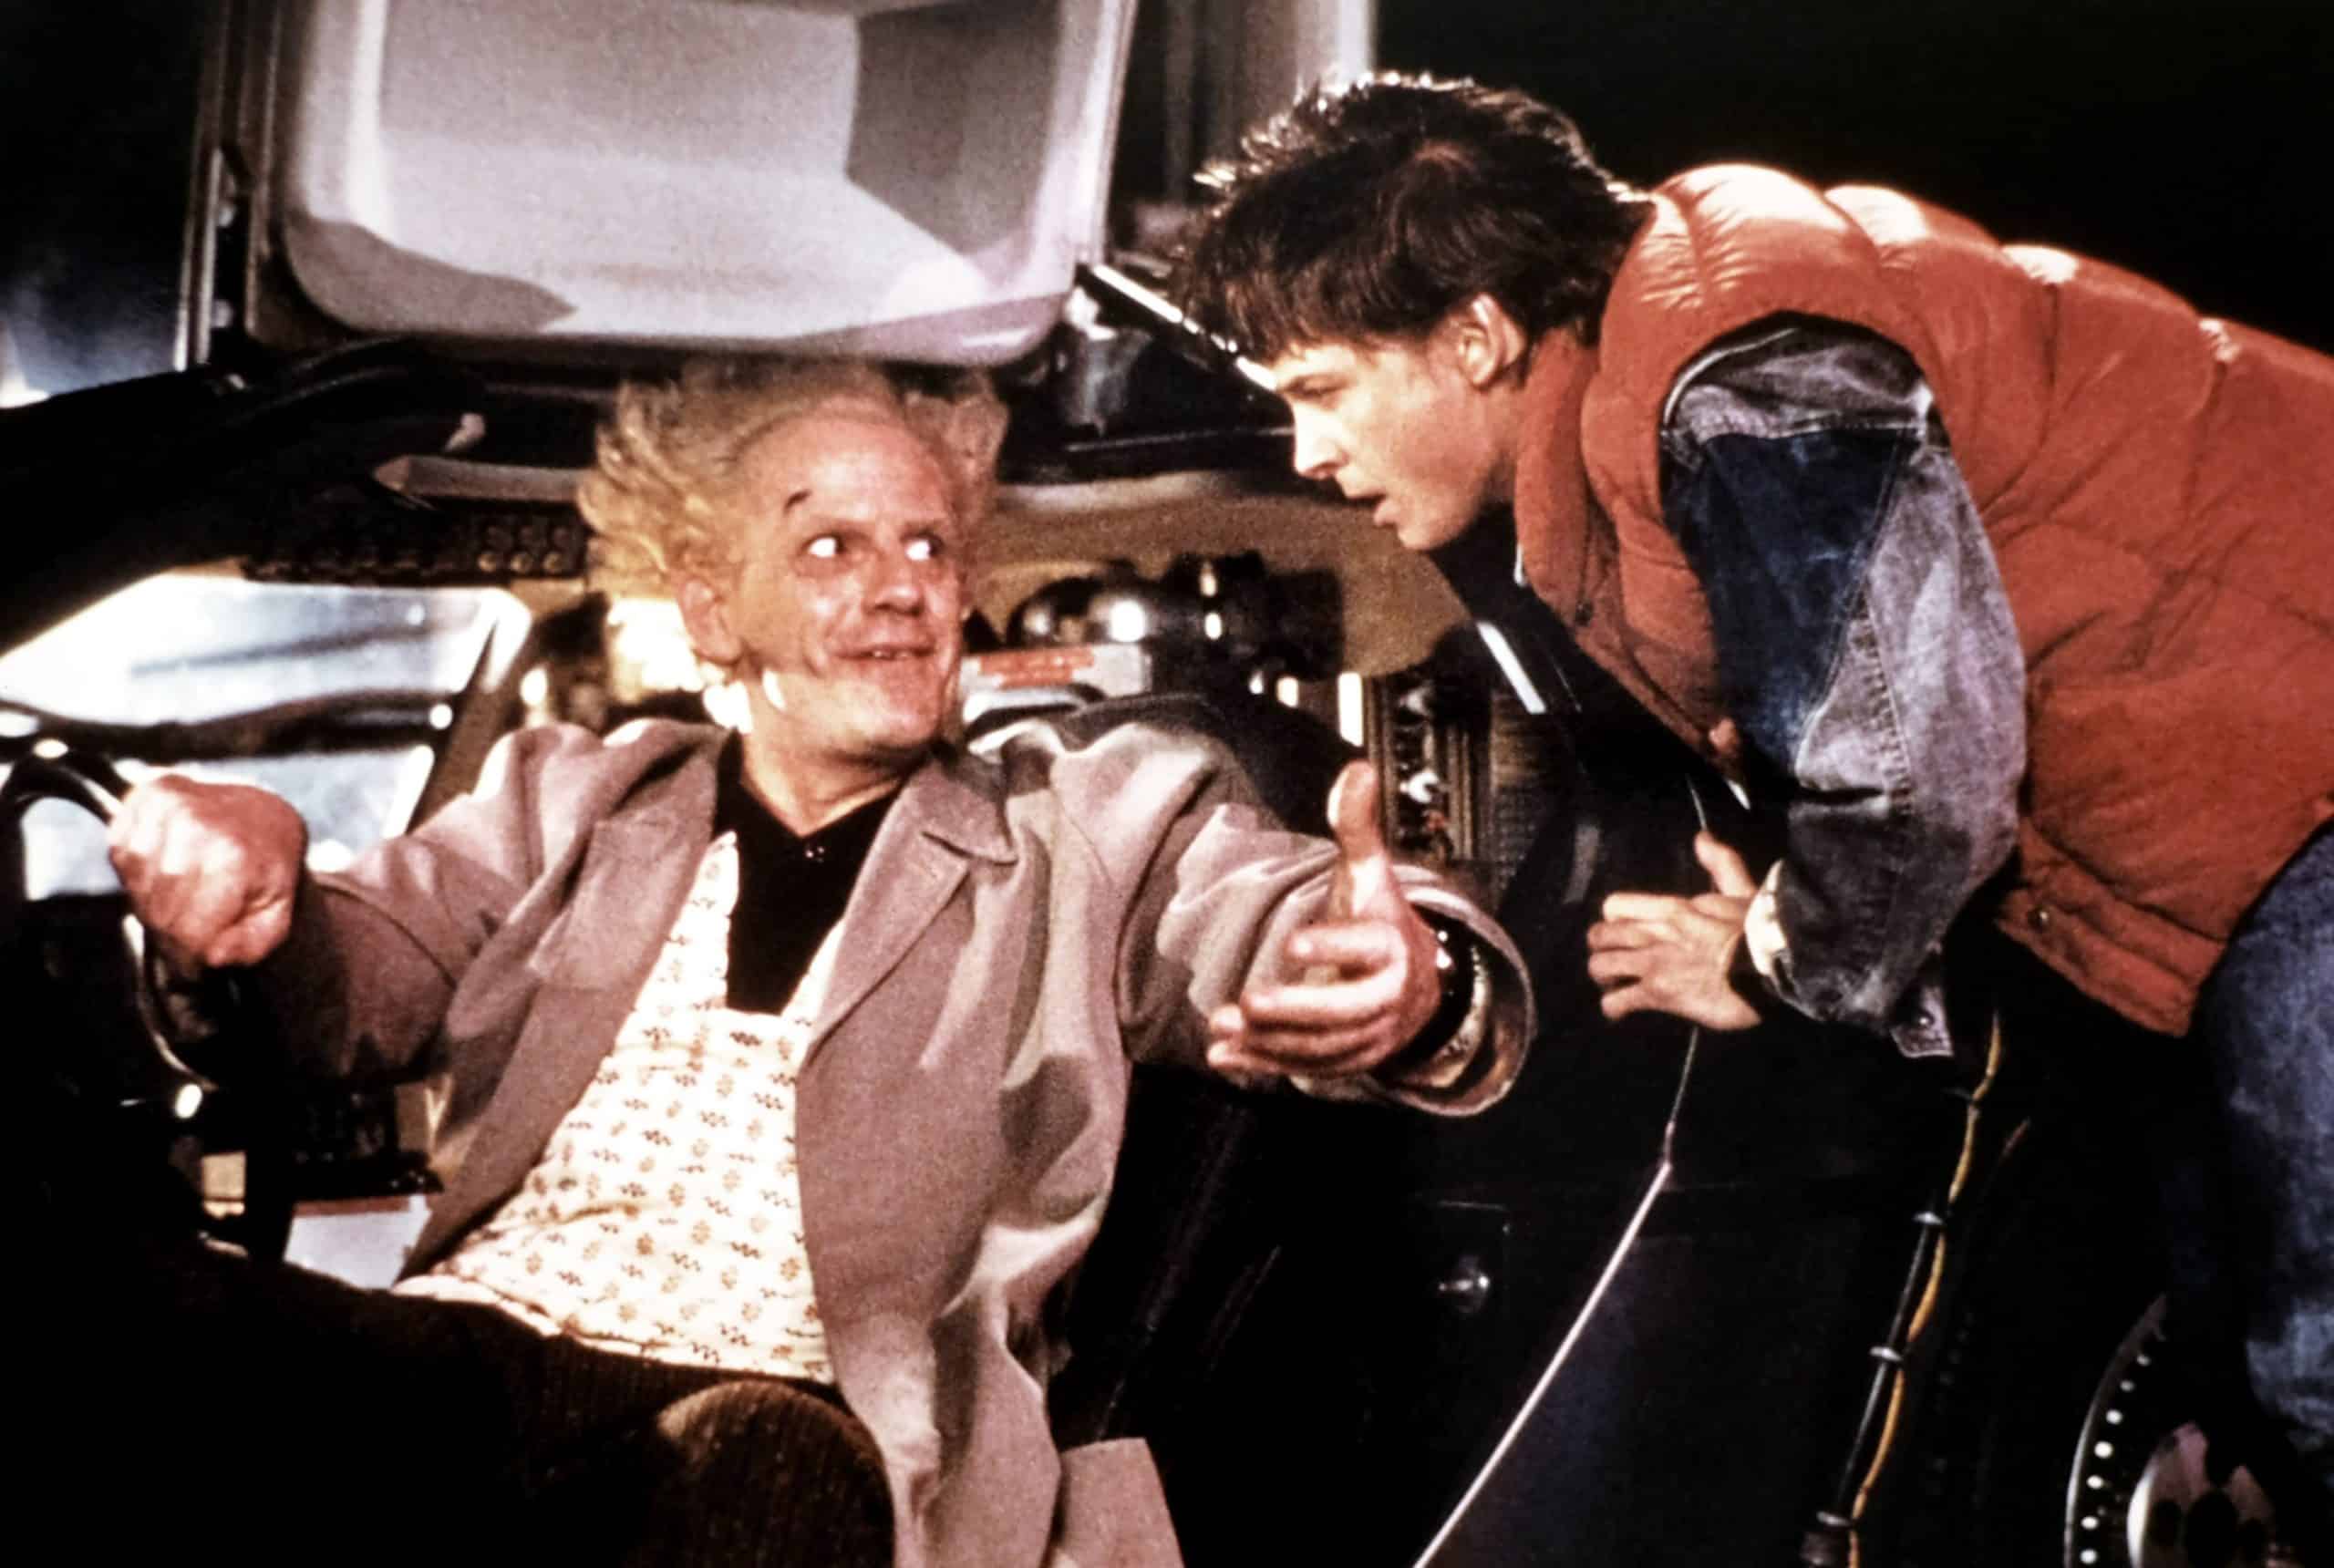 BACK TO THE FUTURE, from left, Christopher Lloyd, Michael J. Fox, 1985